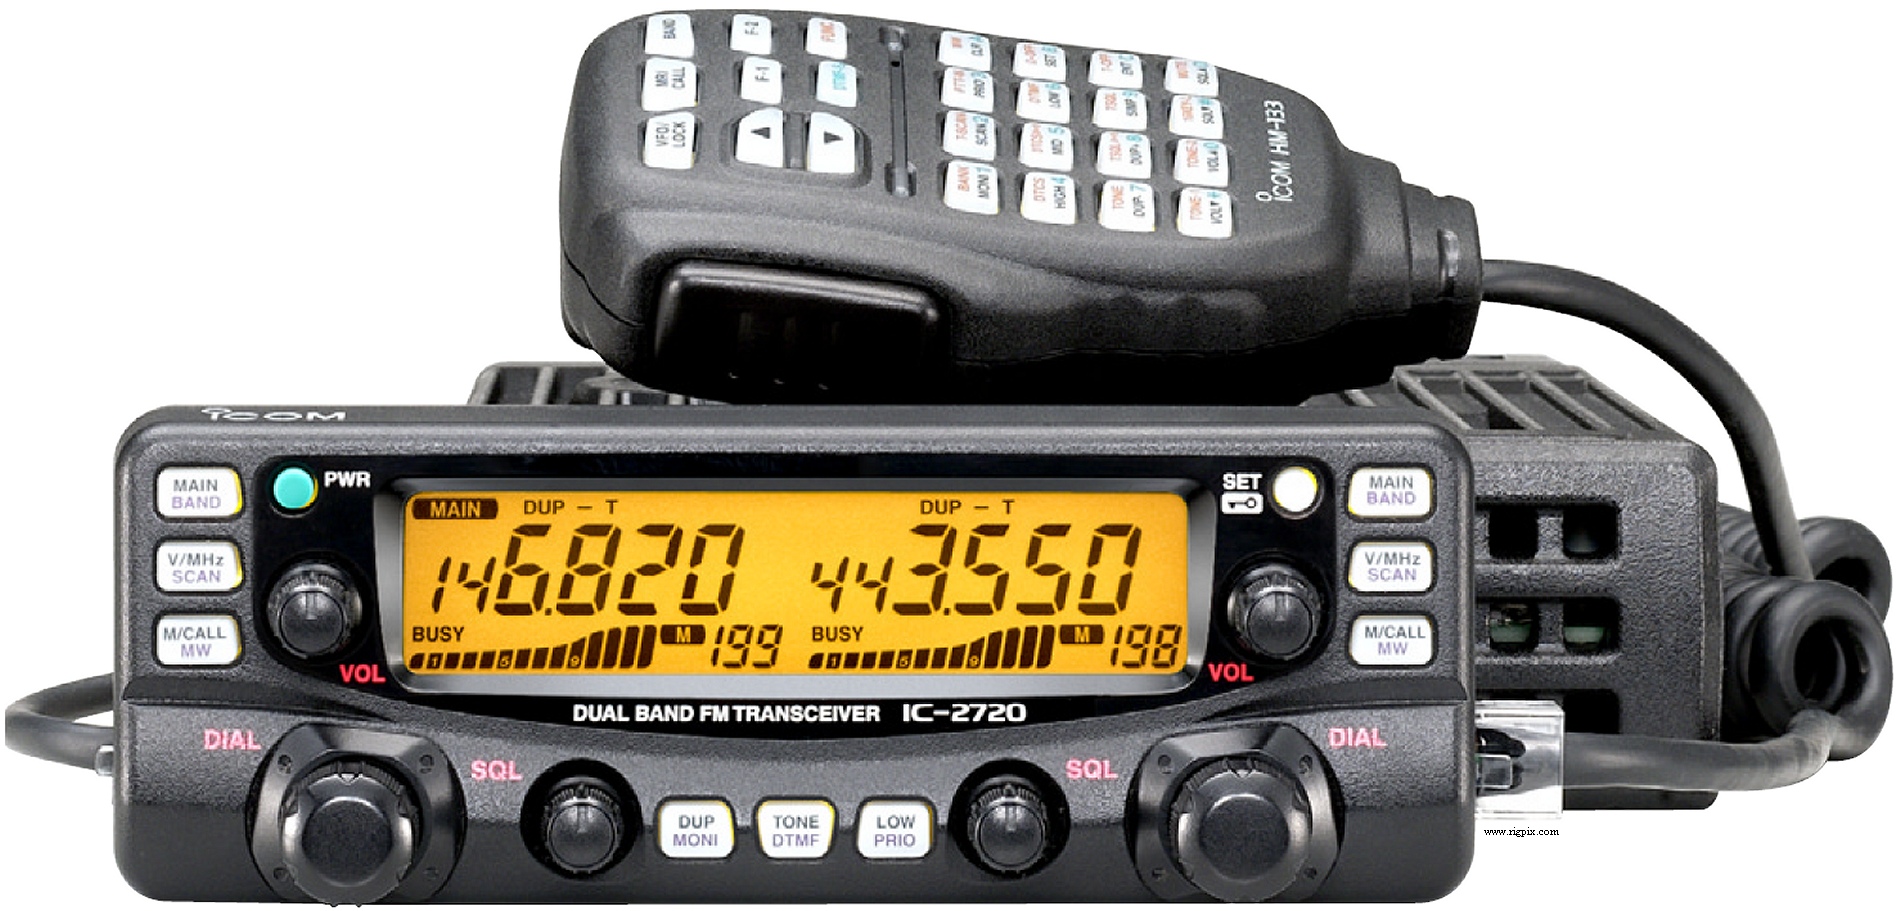 ICOM IC-2720 | forext.org.br